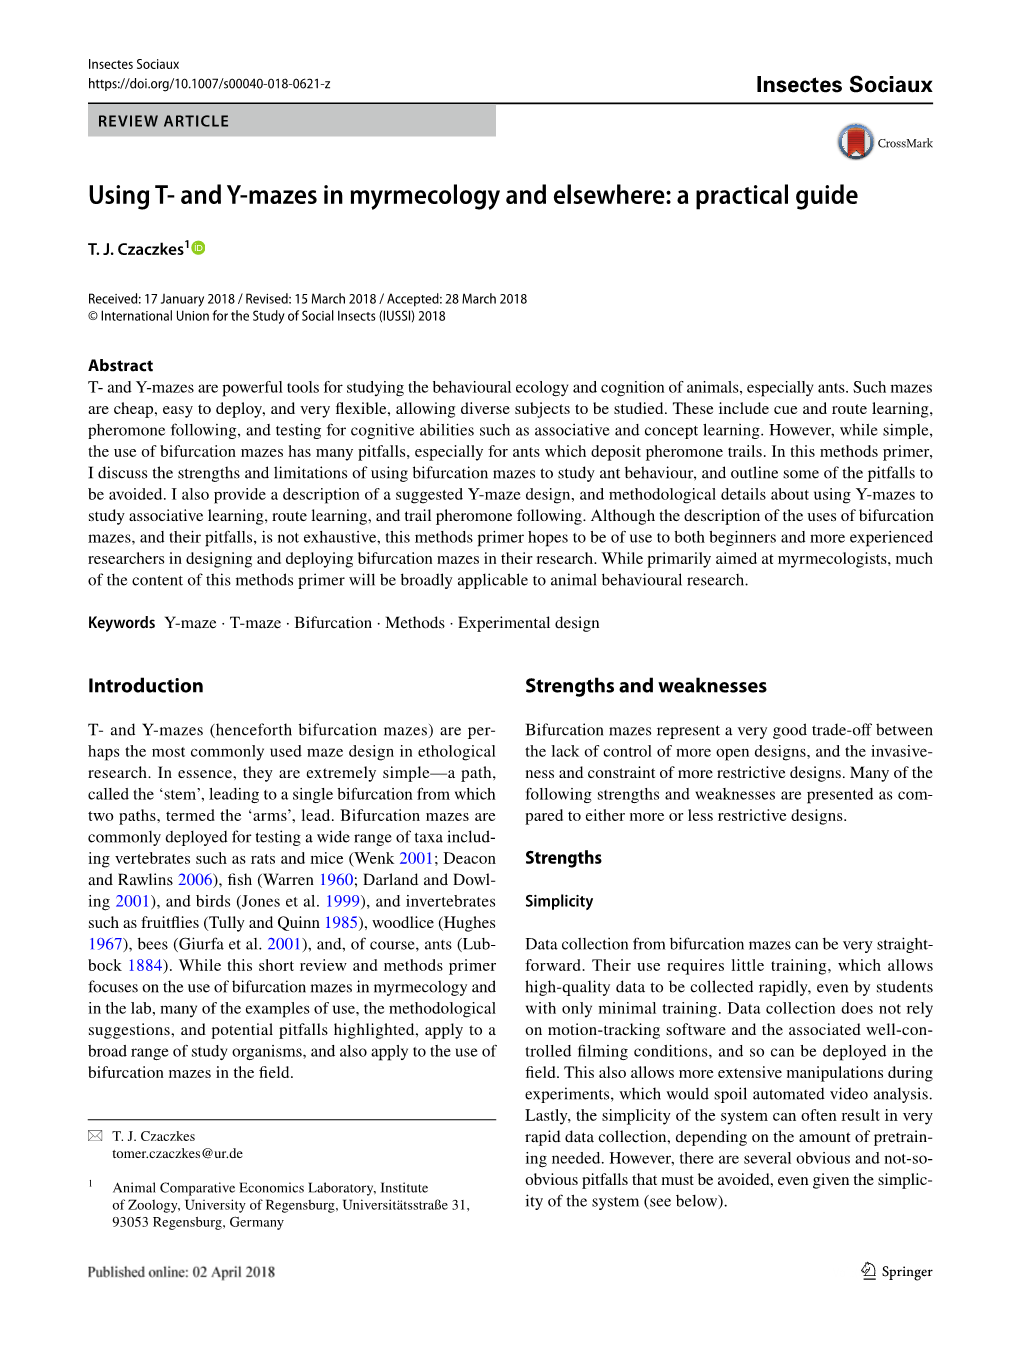 Using T- and Y-Mazes in Myrmecology and Elsewhere: a Practical Guide